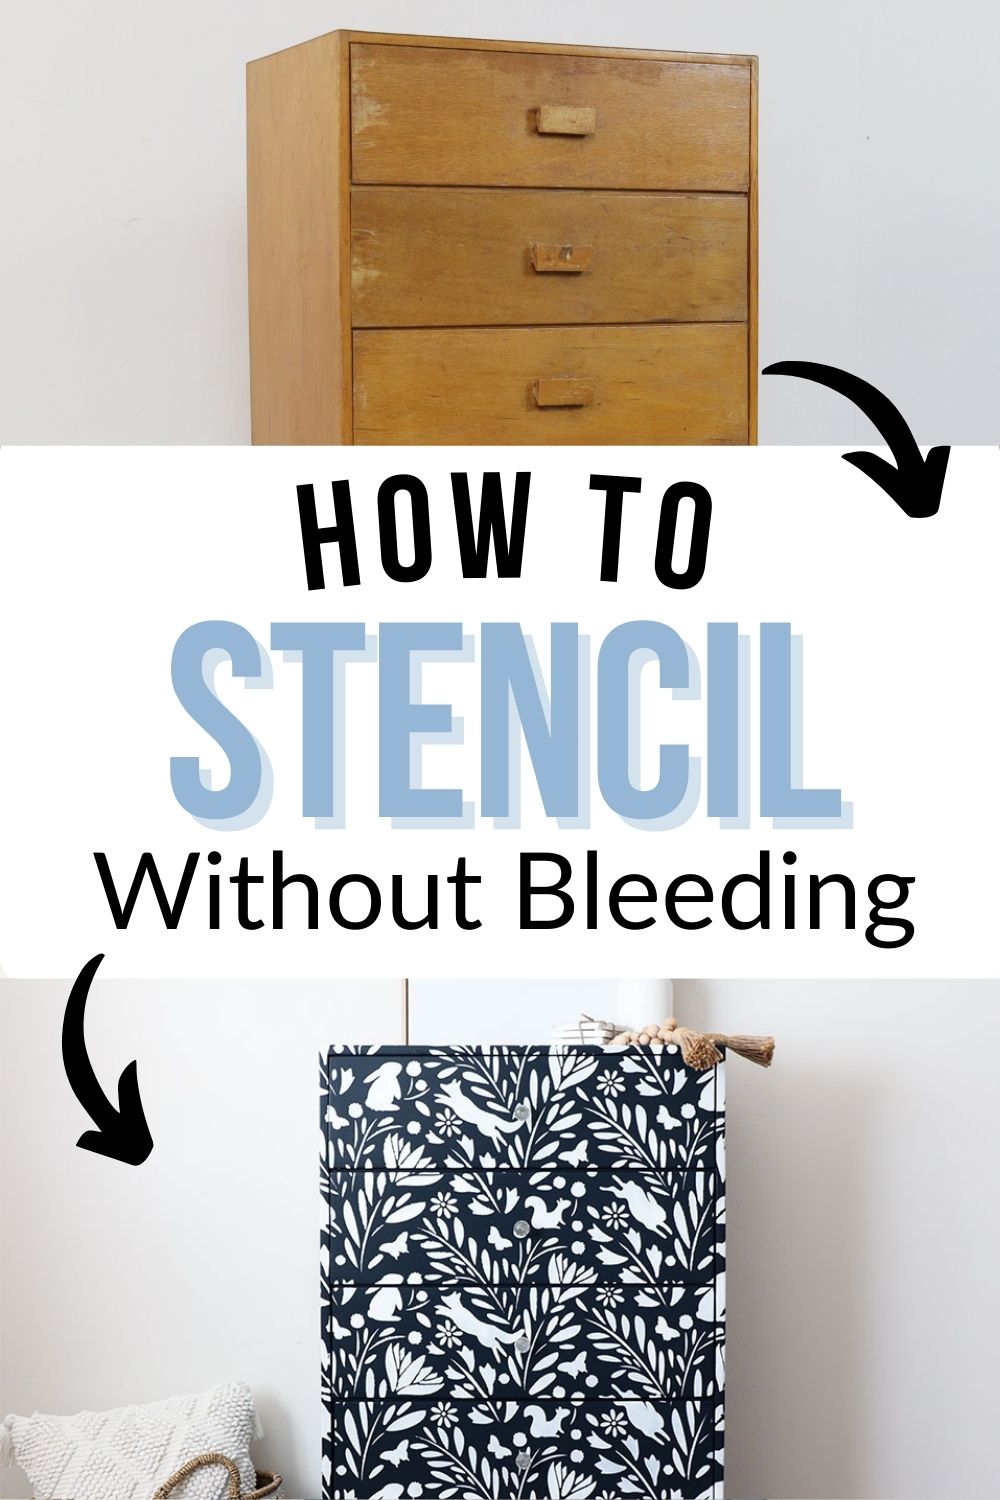 How to Stencil Without Bleeding